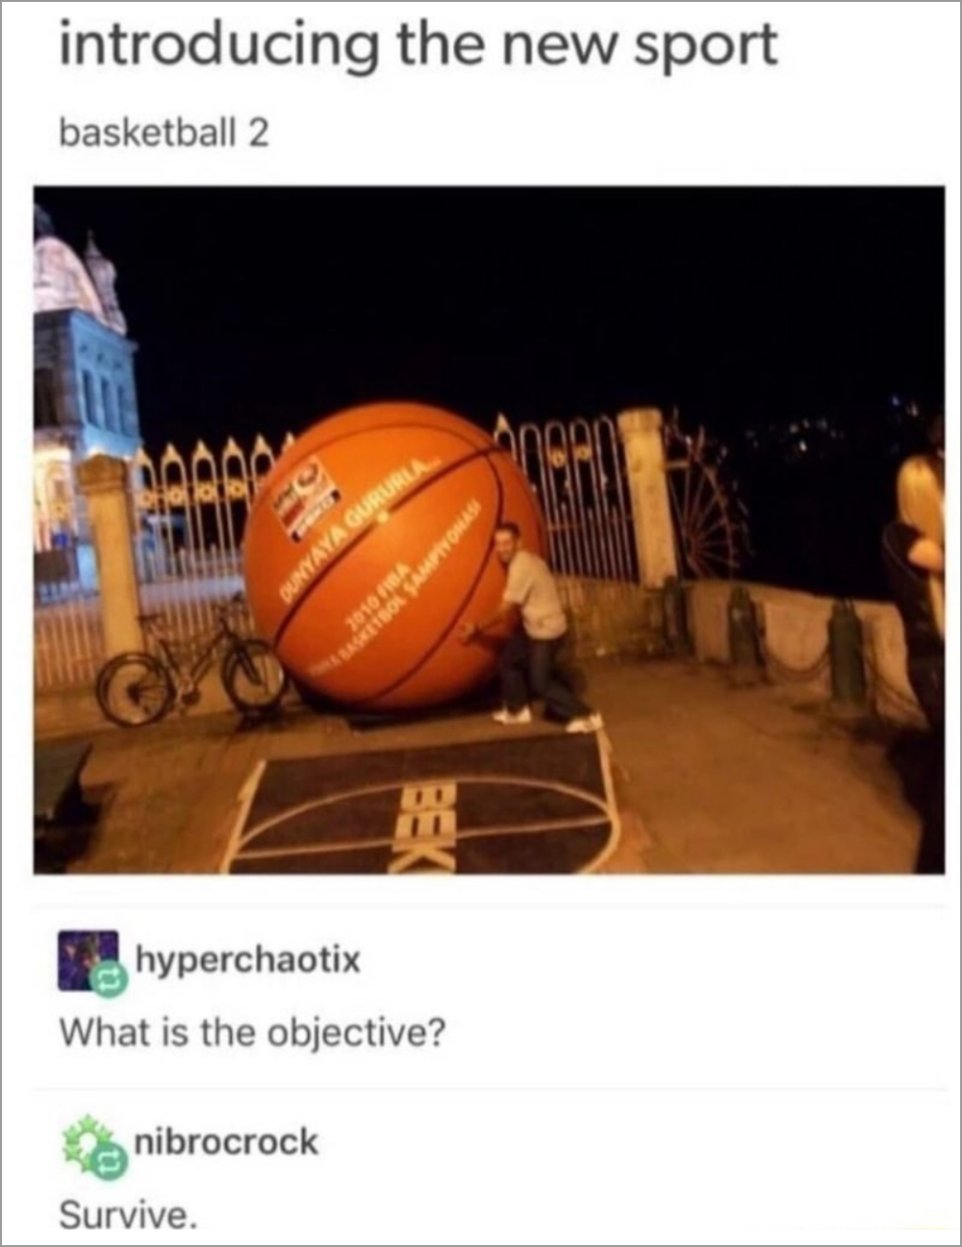 Man pushing giant basketball with caption about the game is just not to get run over by that thing.